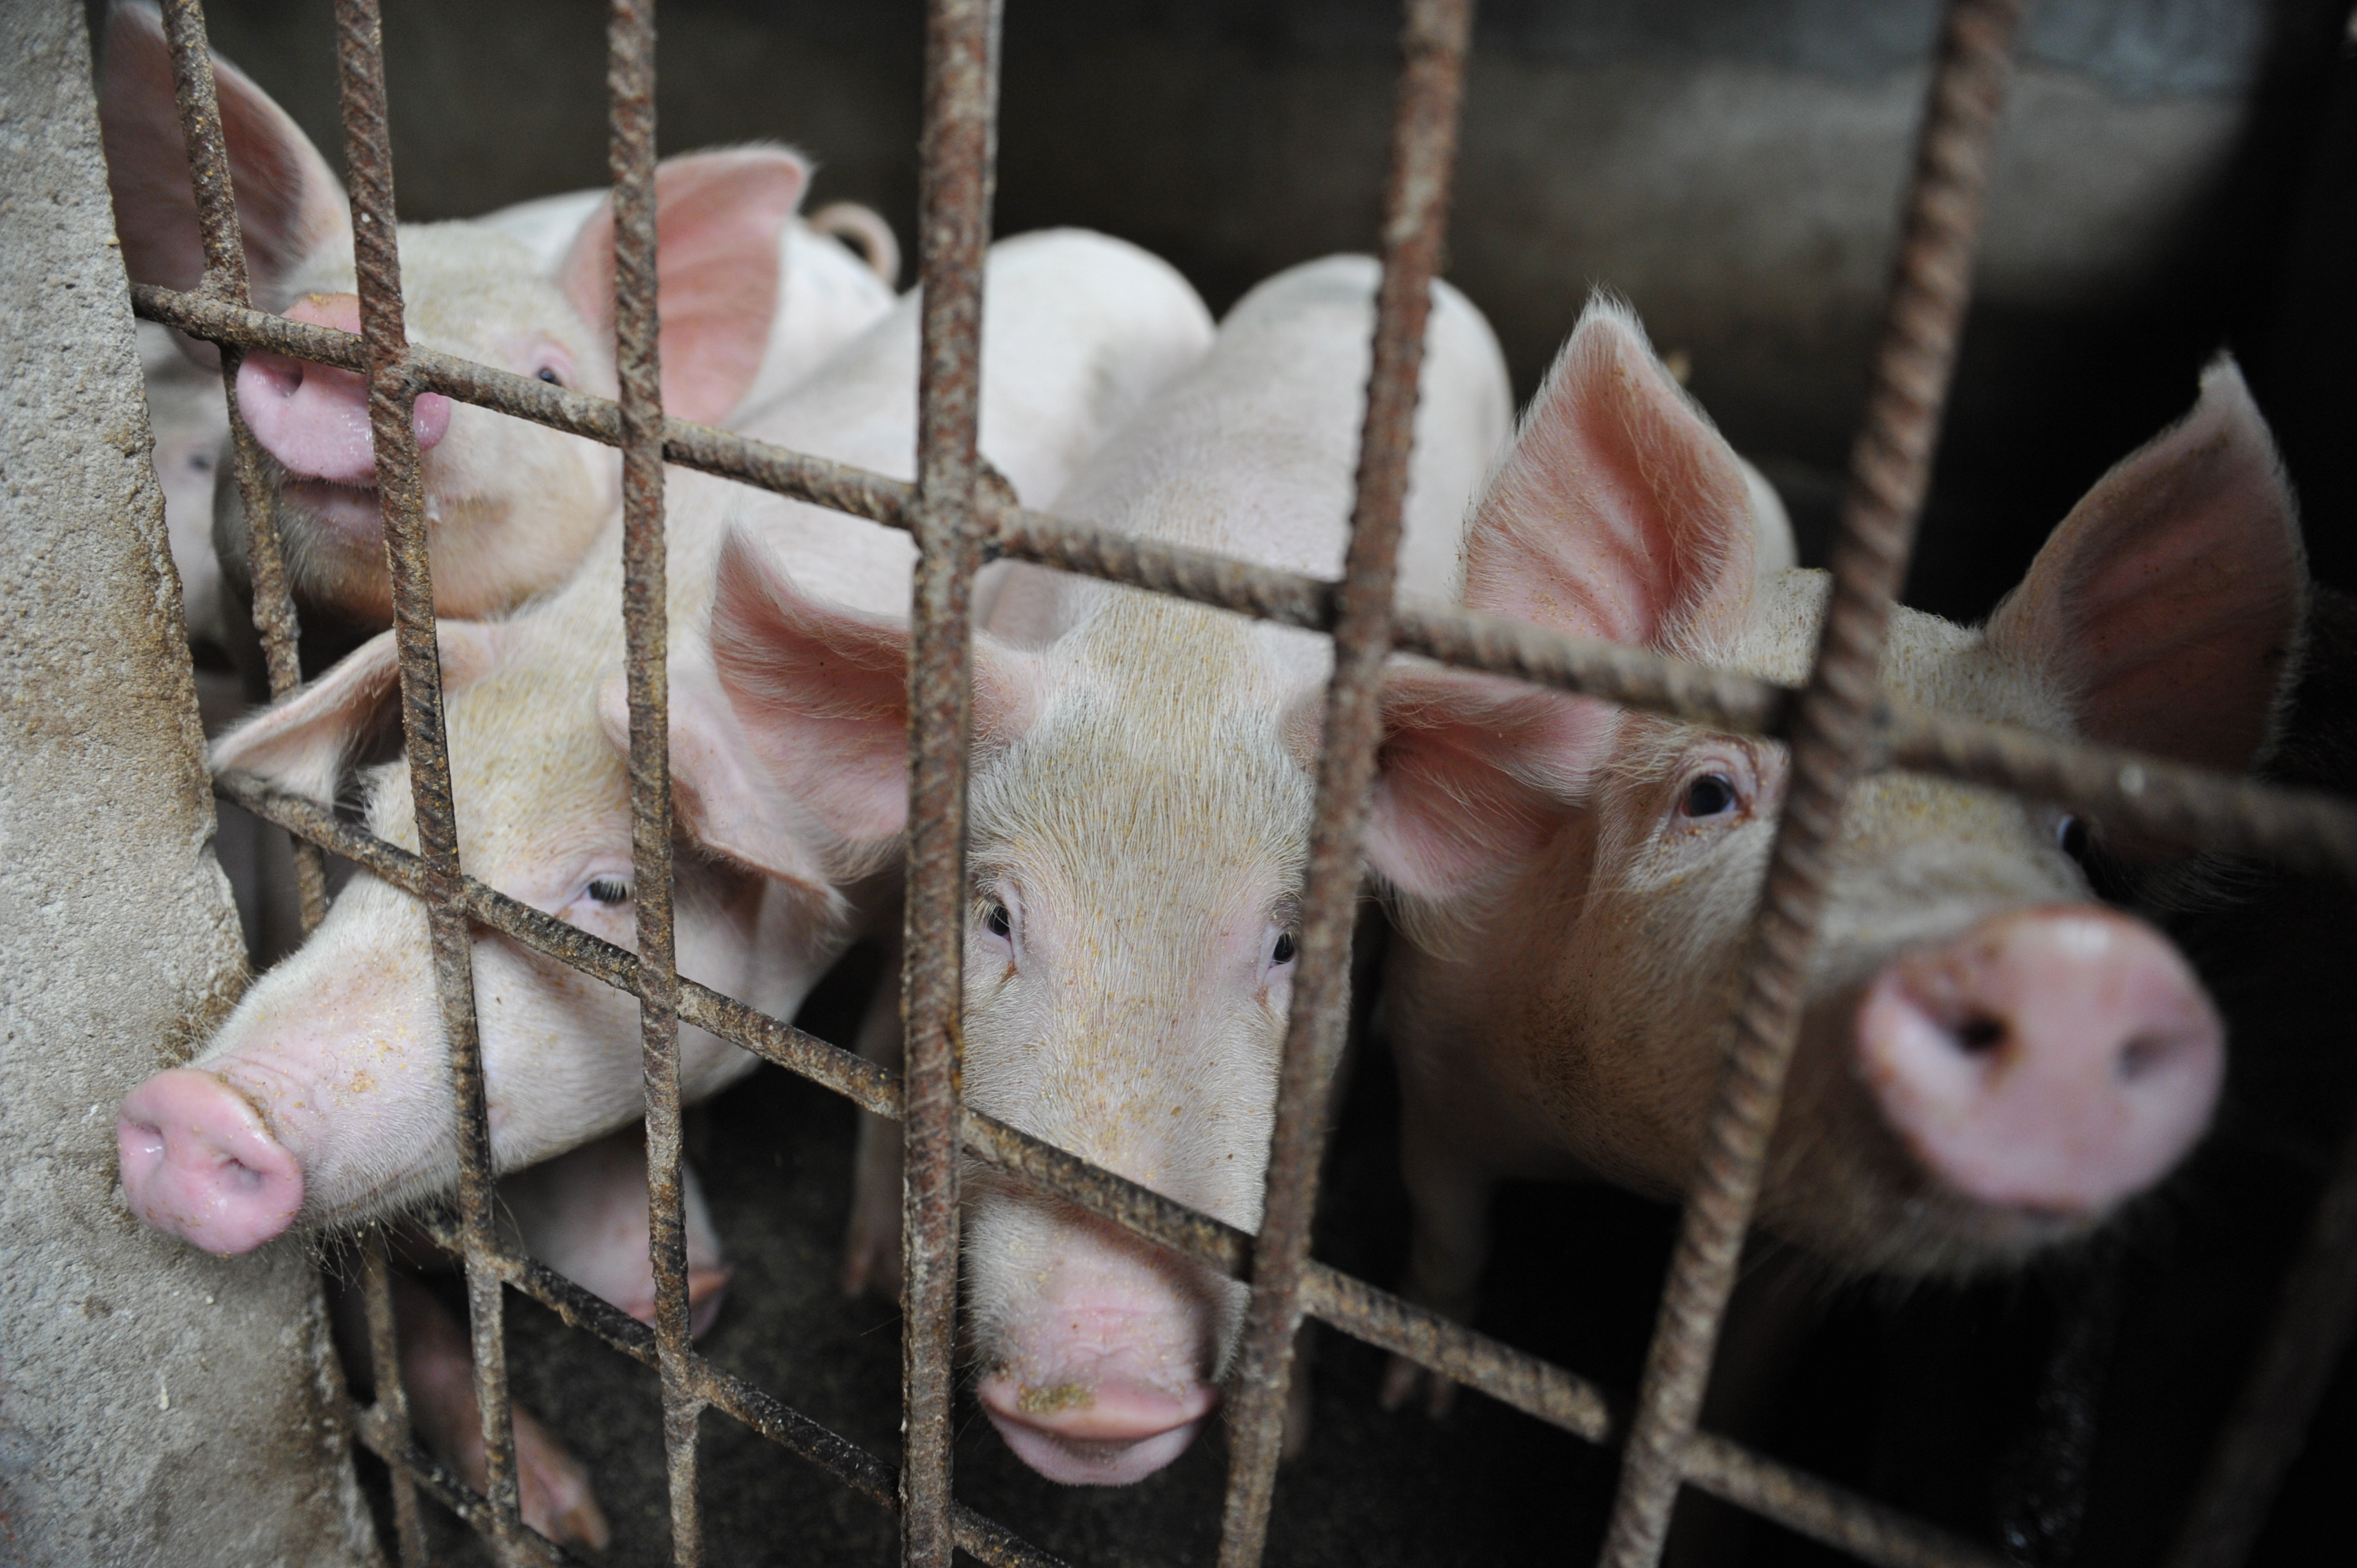 Pigs are seen in a hog pen in a village in Linquan county in central China's Anhui province on Aug. 31, 2018. (Chinatopix/AP)